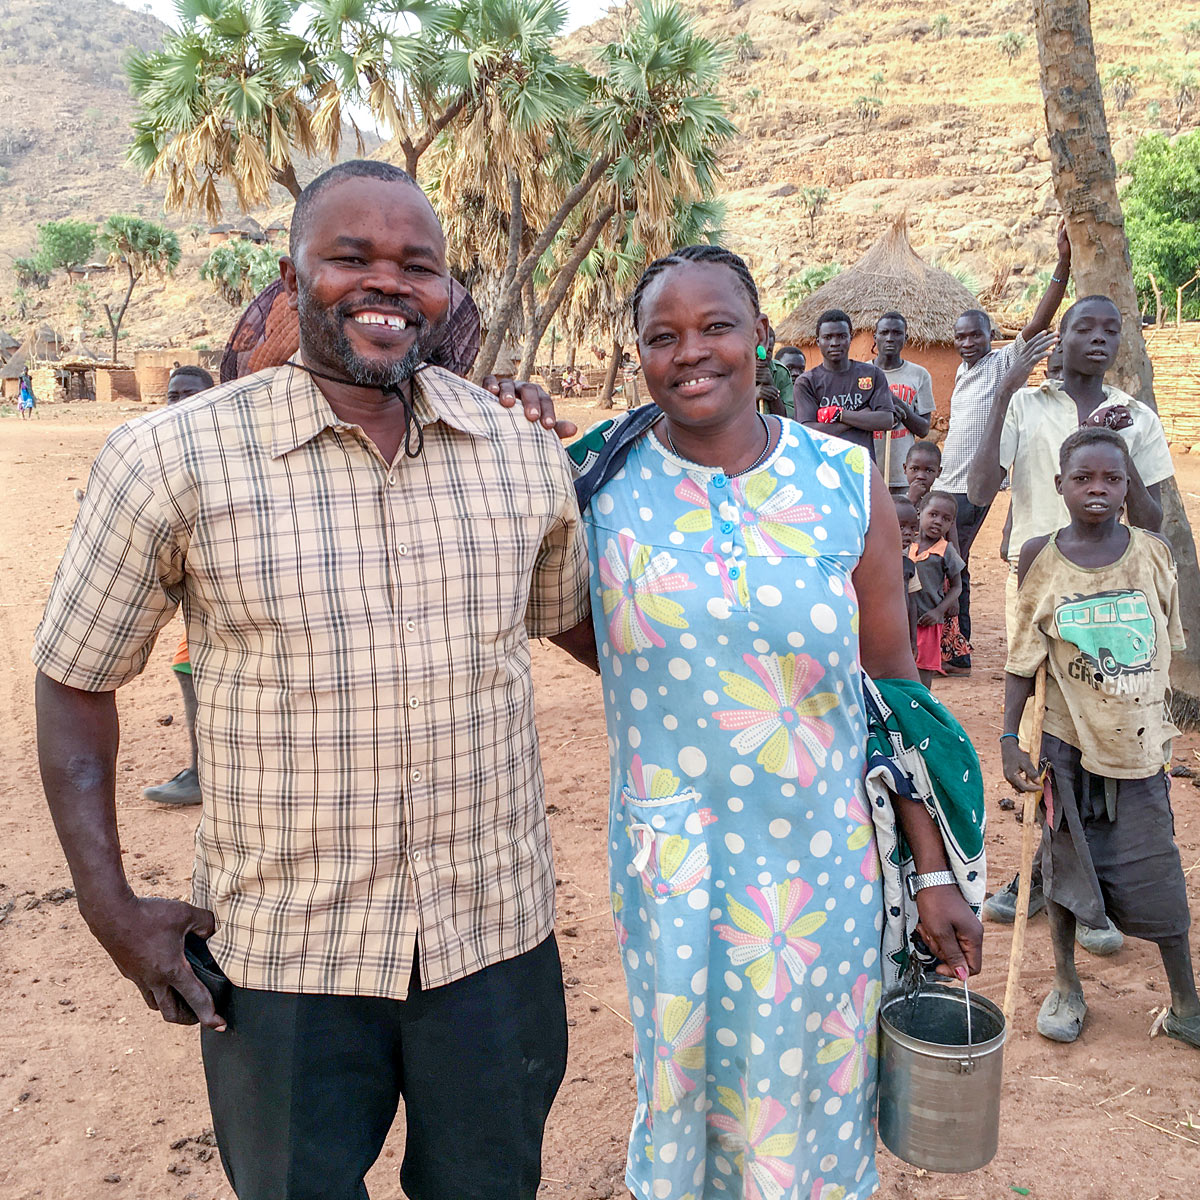 Morris and his wife in African village